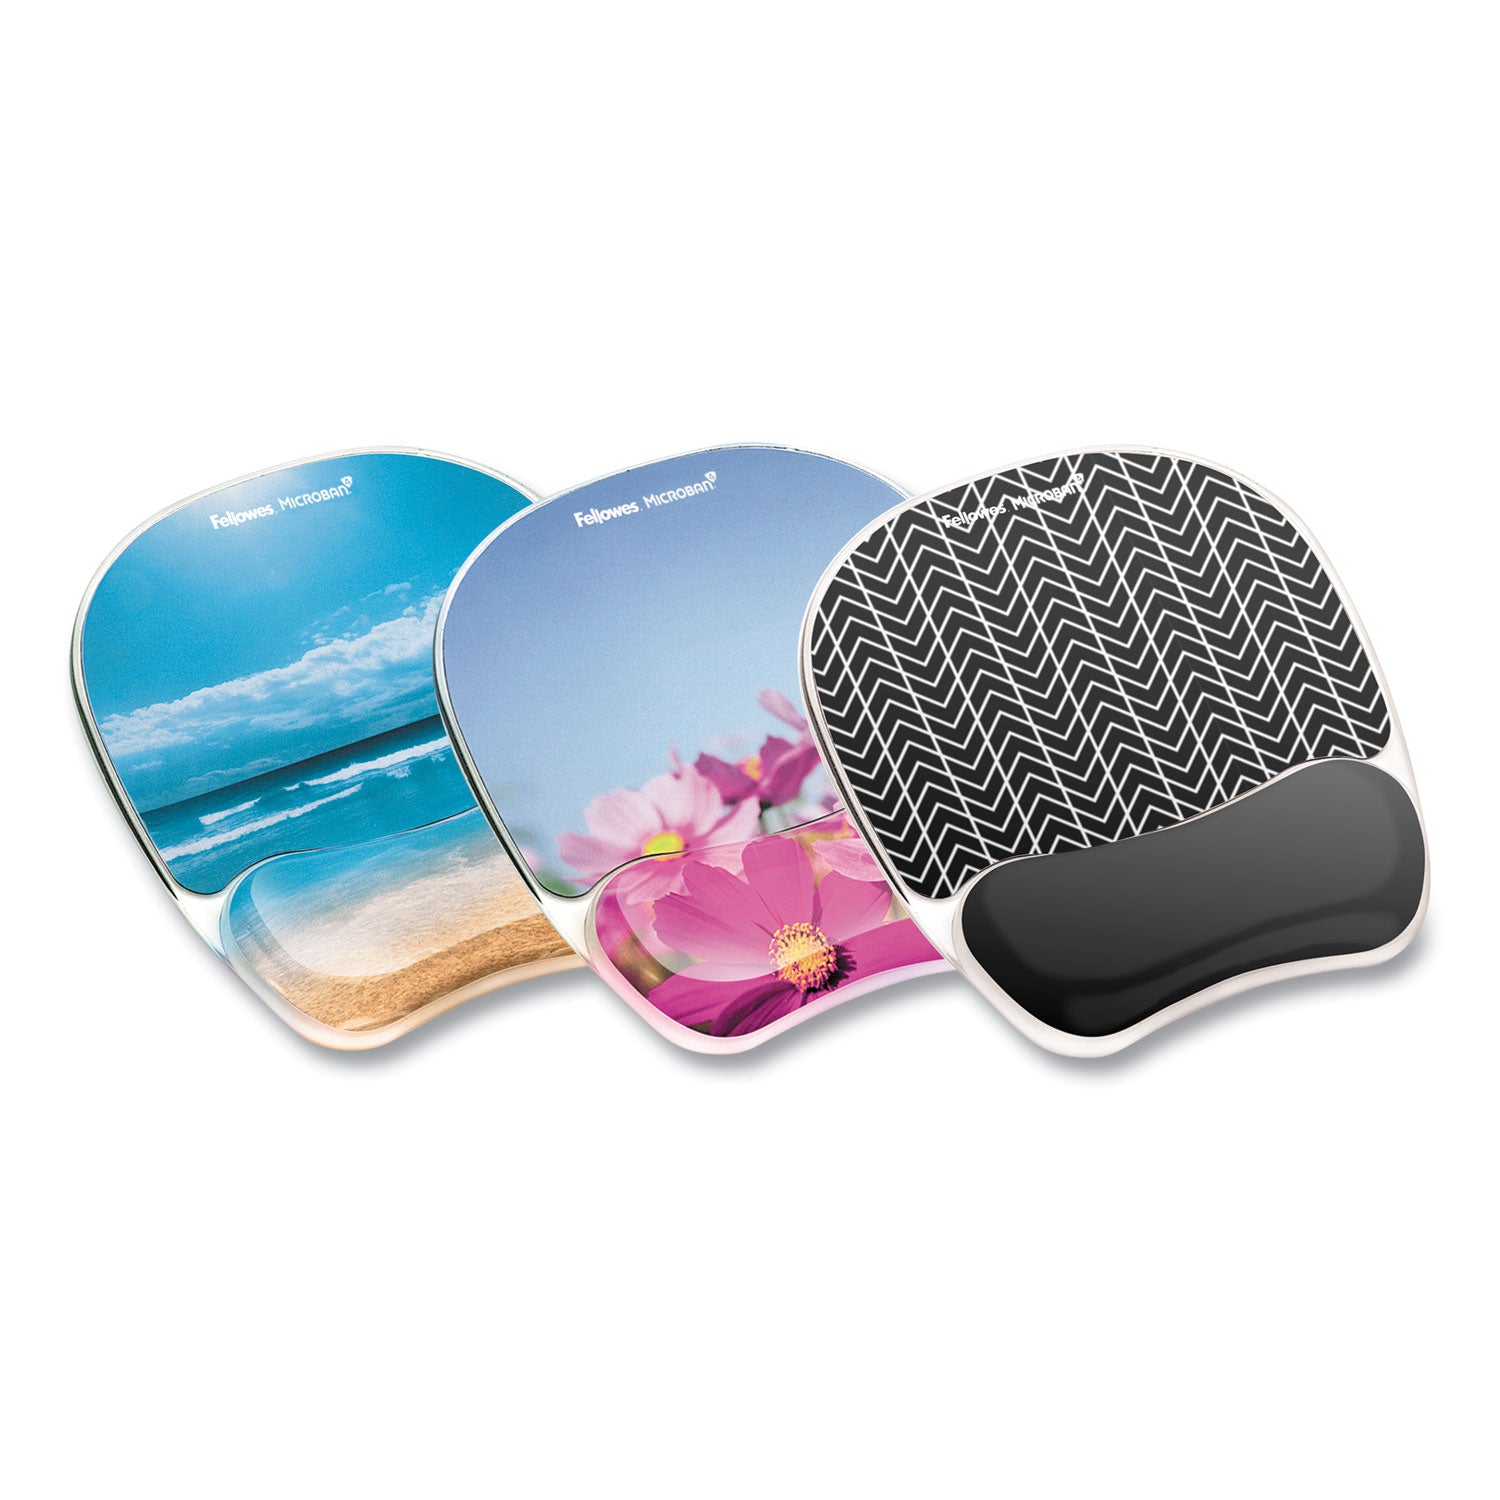 Photo Gel Mouse Pad with Wrist Rest with Microban Protection, 7.87 x 9.25, Sandy Beach Design - 